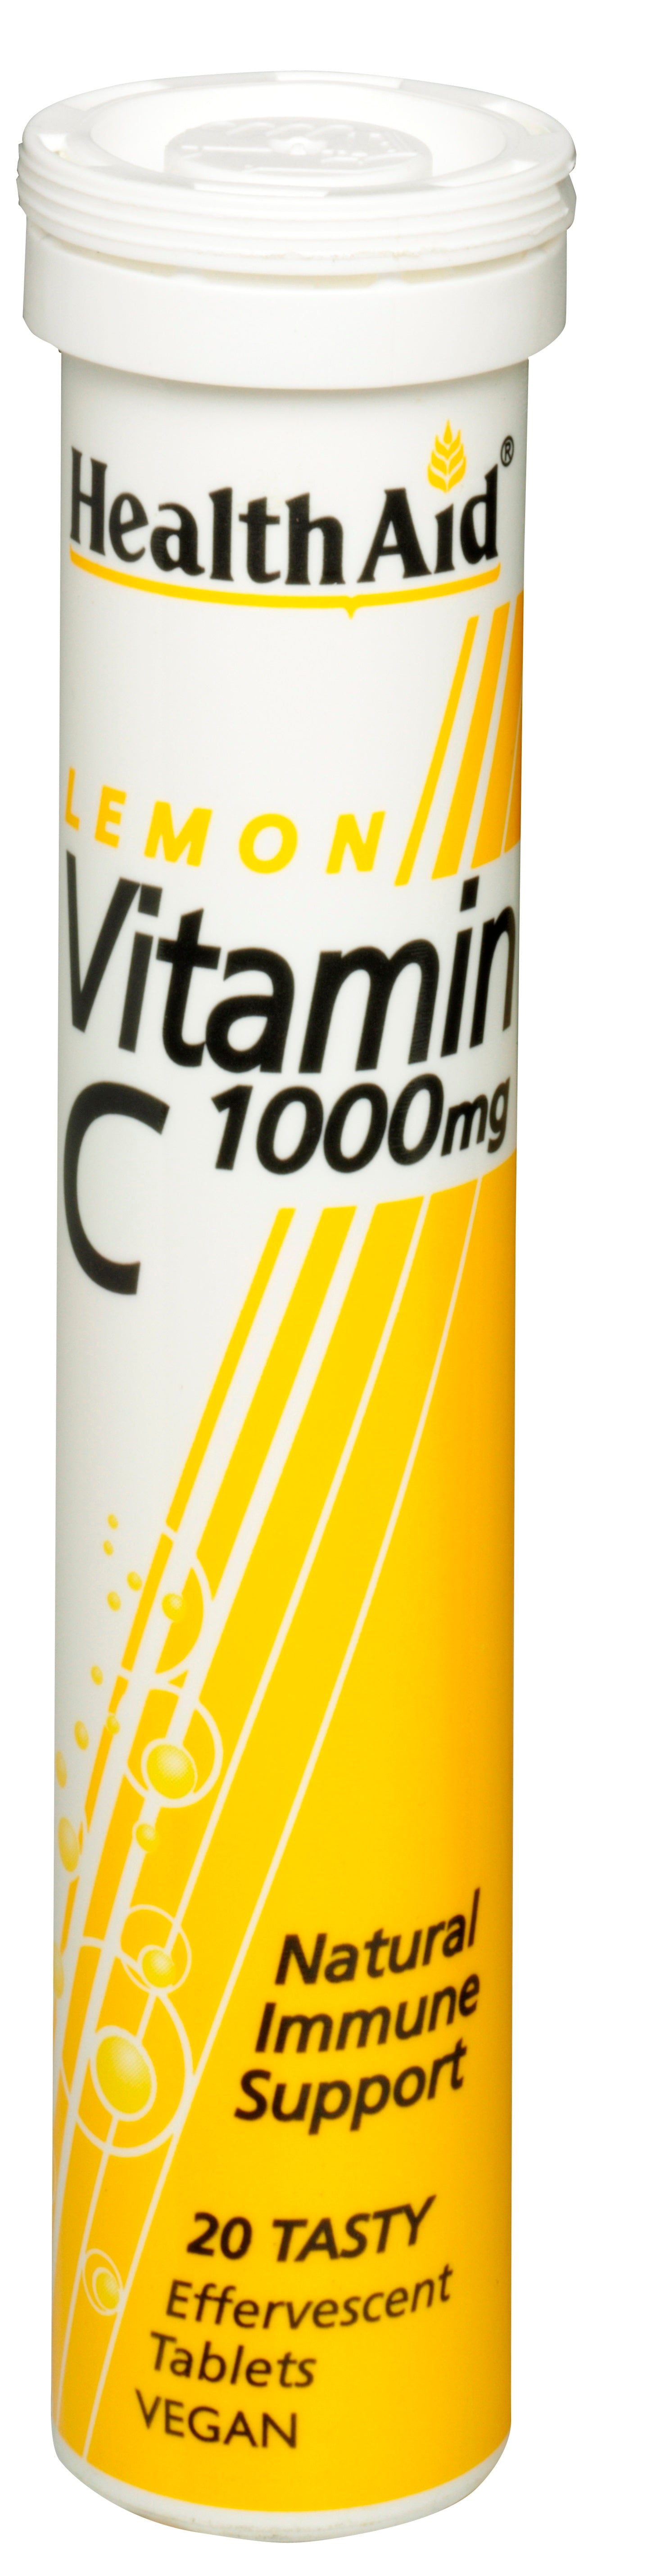 Health Aid Vitamin C 1000mg Effervescent Lemon Flavour 20's - Approved Vitamins